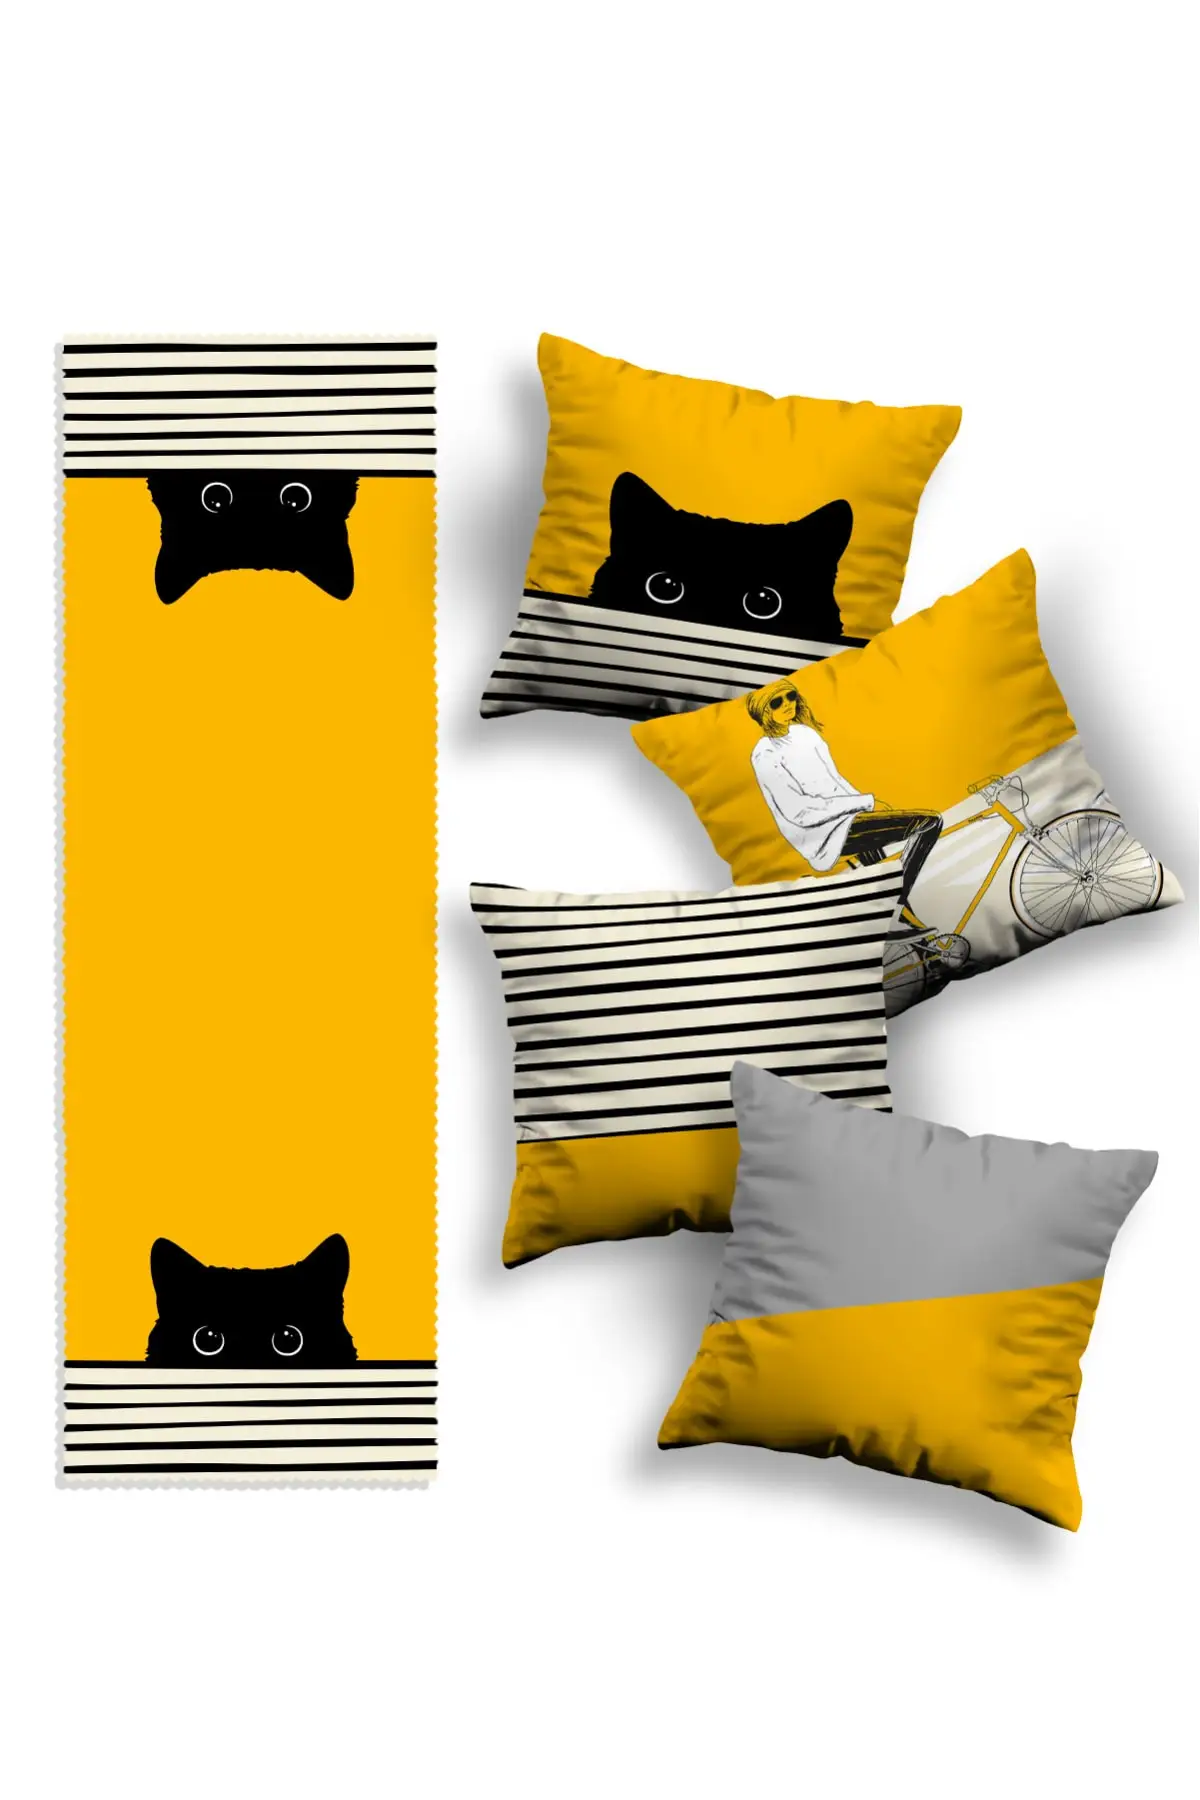 Enlarge Special Design 4 Pieces Cushion Cover and Runner Set Cat Concept